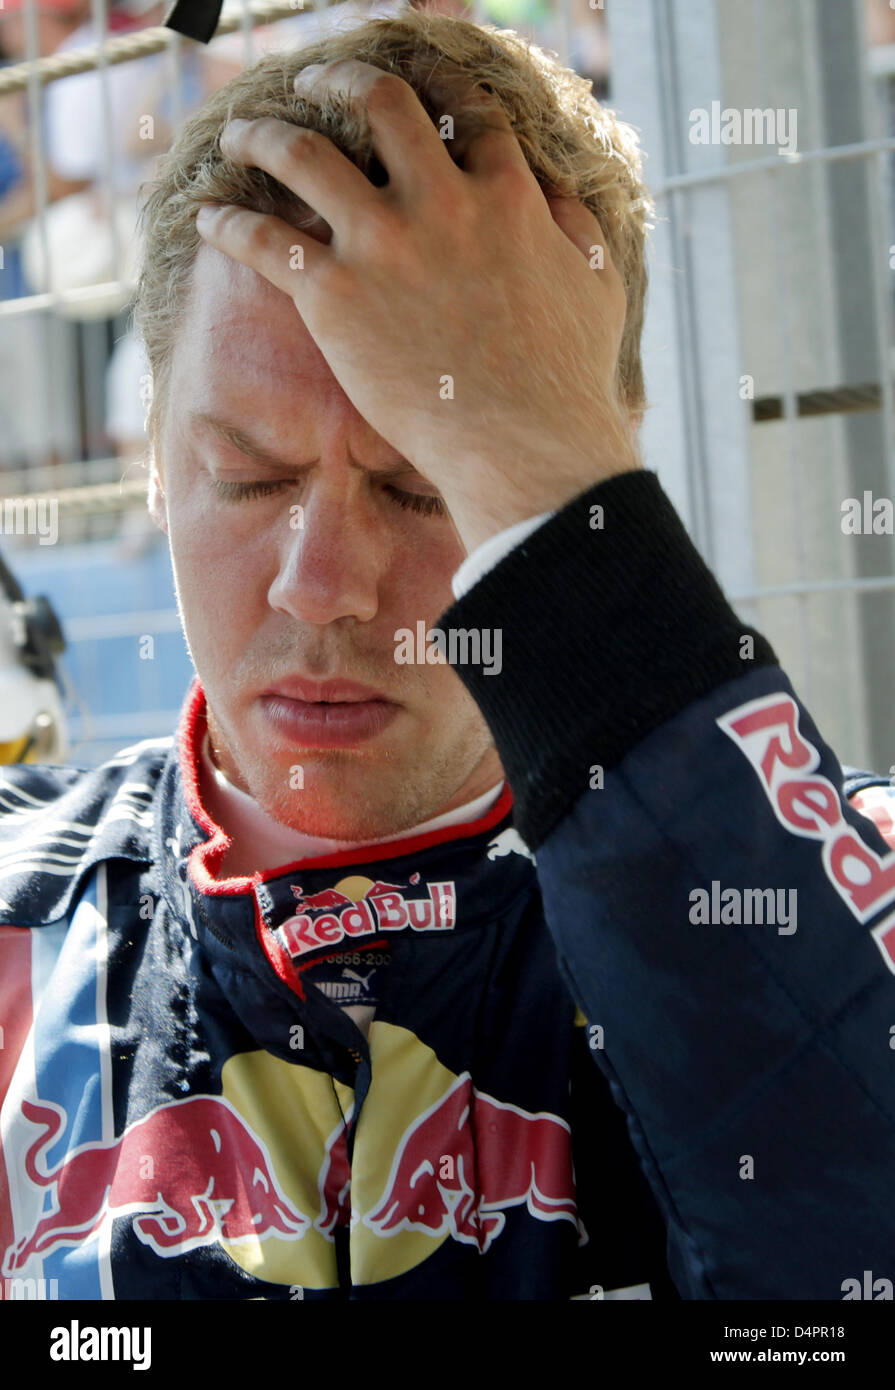 German Formula One driver Sebastian Vettel of Red Bull Racing gestures in the grid ahead of the Grand Prix of Europe at Valencia Street Circuit in Valencia, Spain, 23 August 2009. Photo: Felix Heyder Stock Photo